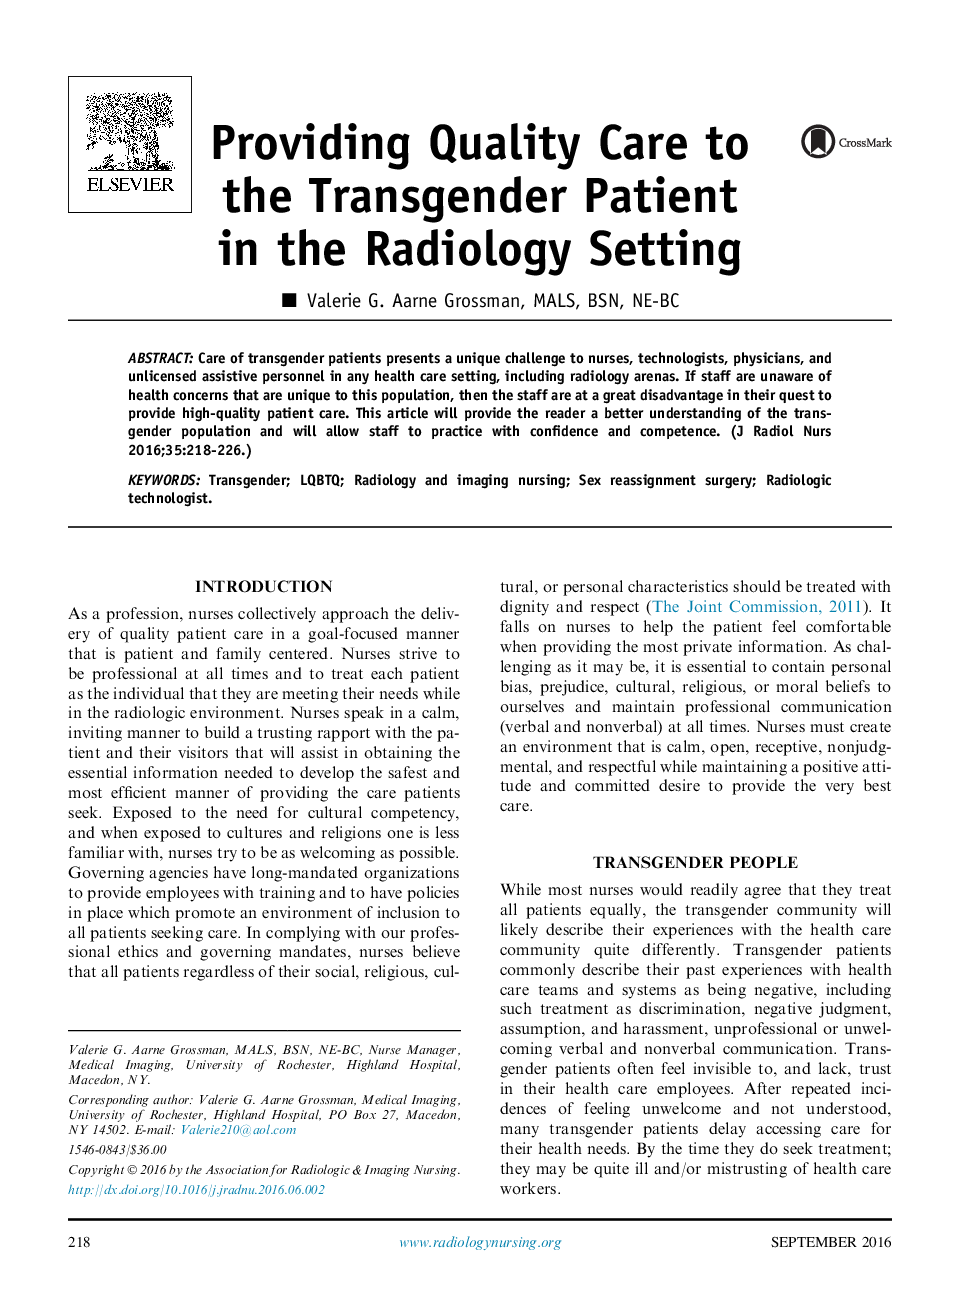 Providing Quality Care to the Transgender Patient in the Radiology Setting